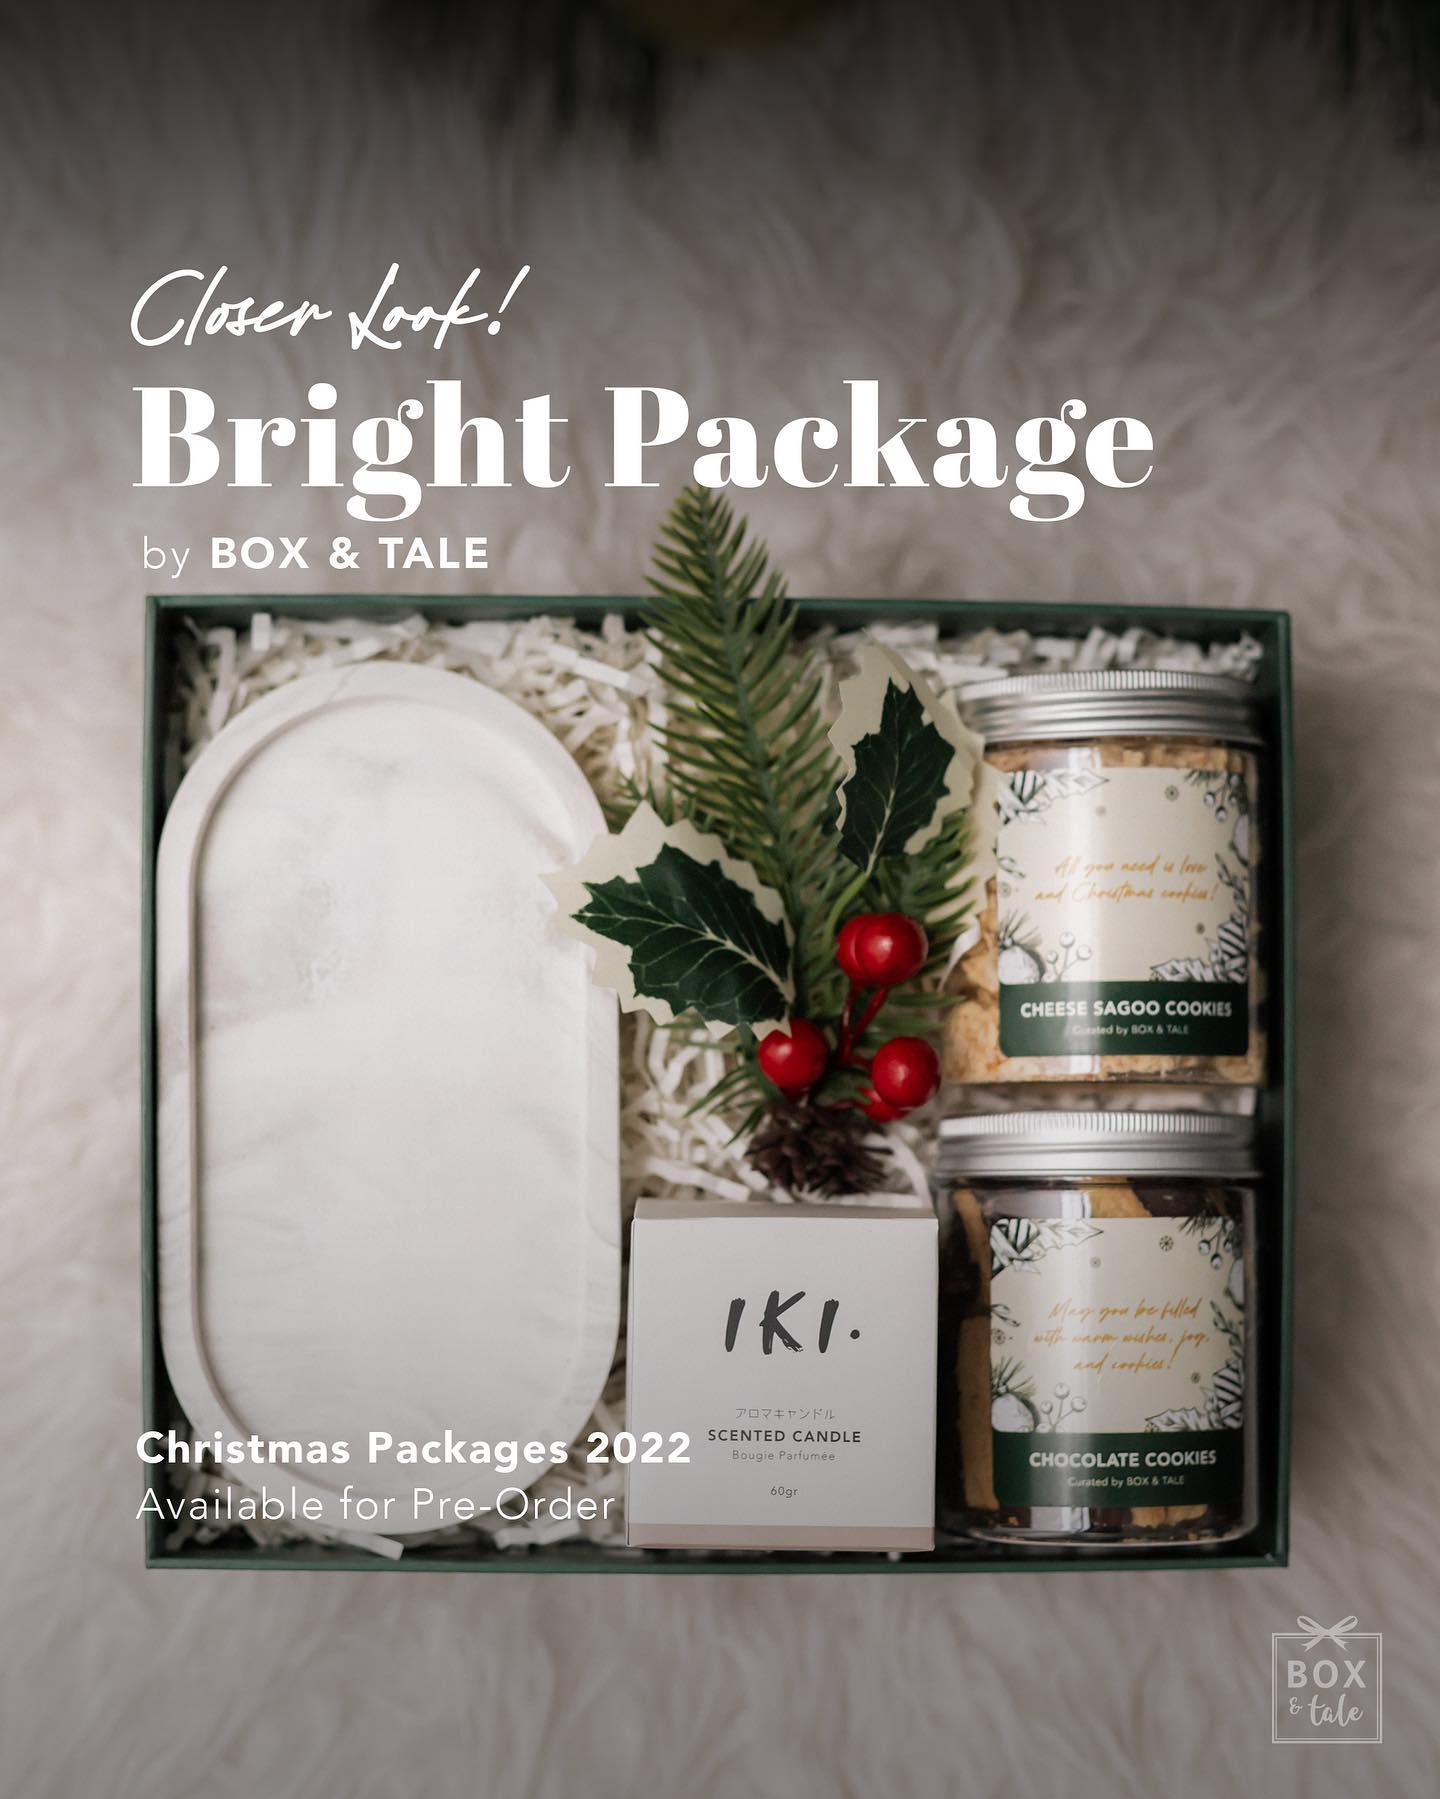 2 days left to Pre-Order, let’s take a look! 👀

A little something to kick off the Christmas spirit.
Another bespoke gift options for your loved ones.

WHAT’S INSIDE
Box & Tale’s Personalized Box
IKI Scented Candle,
Concrete Tray,
Cheese Sagoo Cookies,
Chocolate Cookies,
Greeting Card with Custom Photo

Includes: Gift Packaging, Hand Wrapping, & Custom Card.
Box Size: 21x25x10 cm
____

PRE-ORDER AVAILABLE until 2 December 2022
Shipping 10 December 2022

Contact us through Whatsapp or DM, also feel free to reach out to us for Corporate Gifting!

Limited Slot Available, Don’t Miss It!

——

BOX & TALE
(Custom Gift, Hampers, & Corporate)
Personalized Your Own Gift at www.boxandtale.com

Contact us at 0813 1103 3691

——

#boxandtale #christmashampers #hampersnataljakarta #hampersnatal #kadojakarta